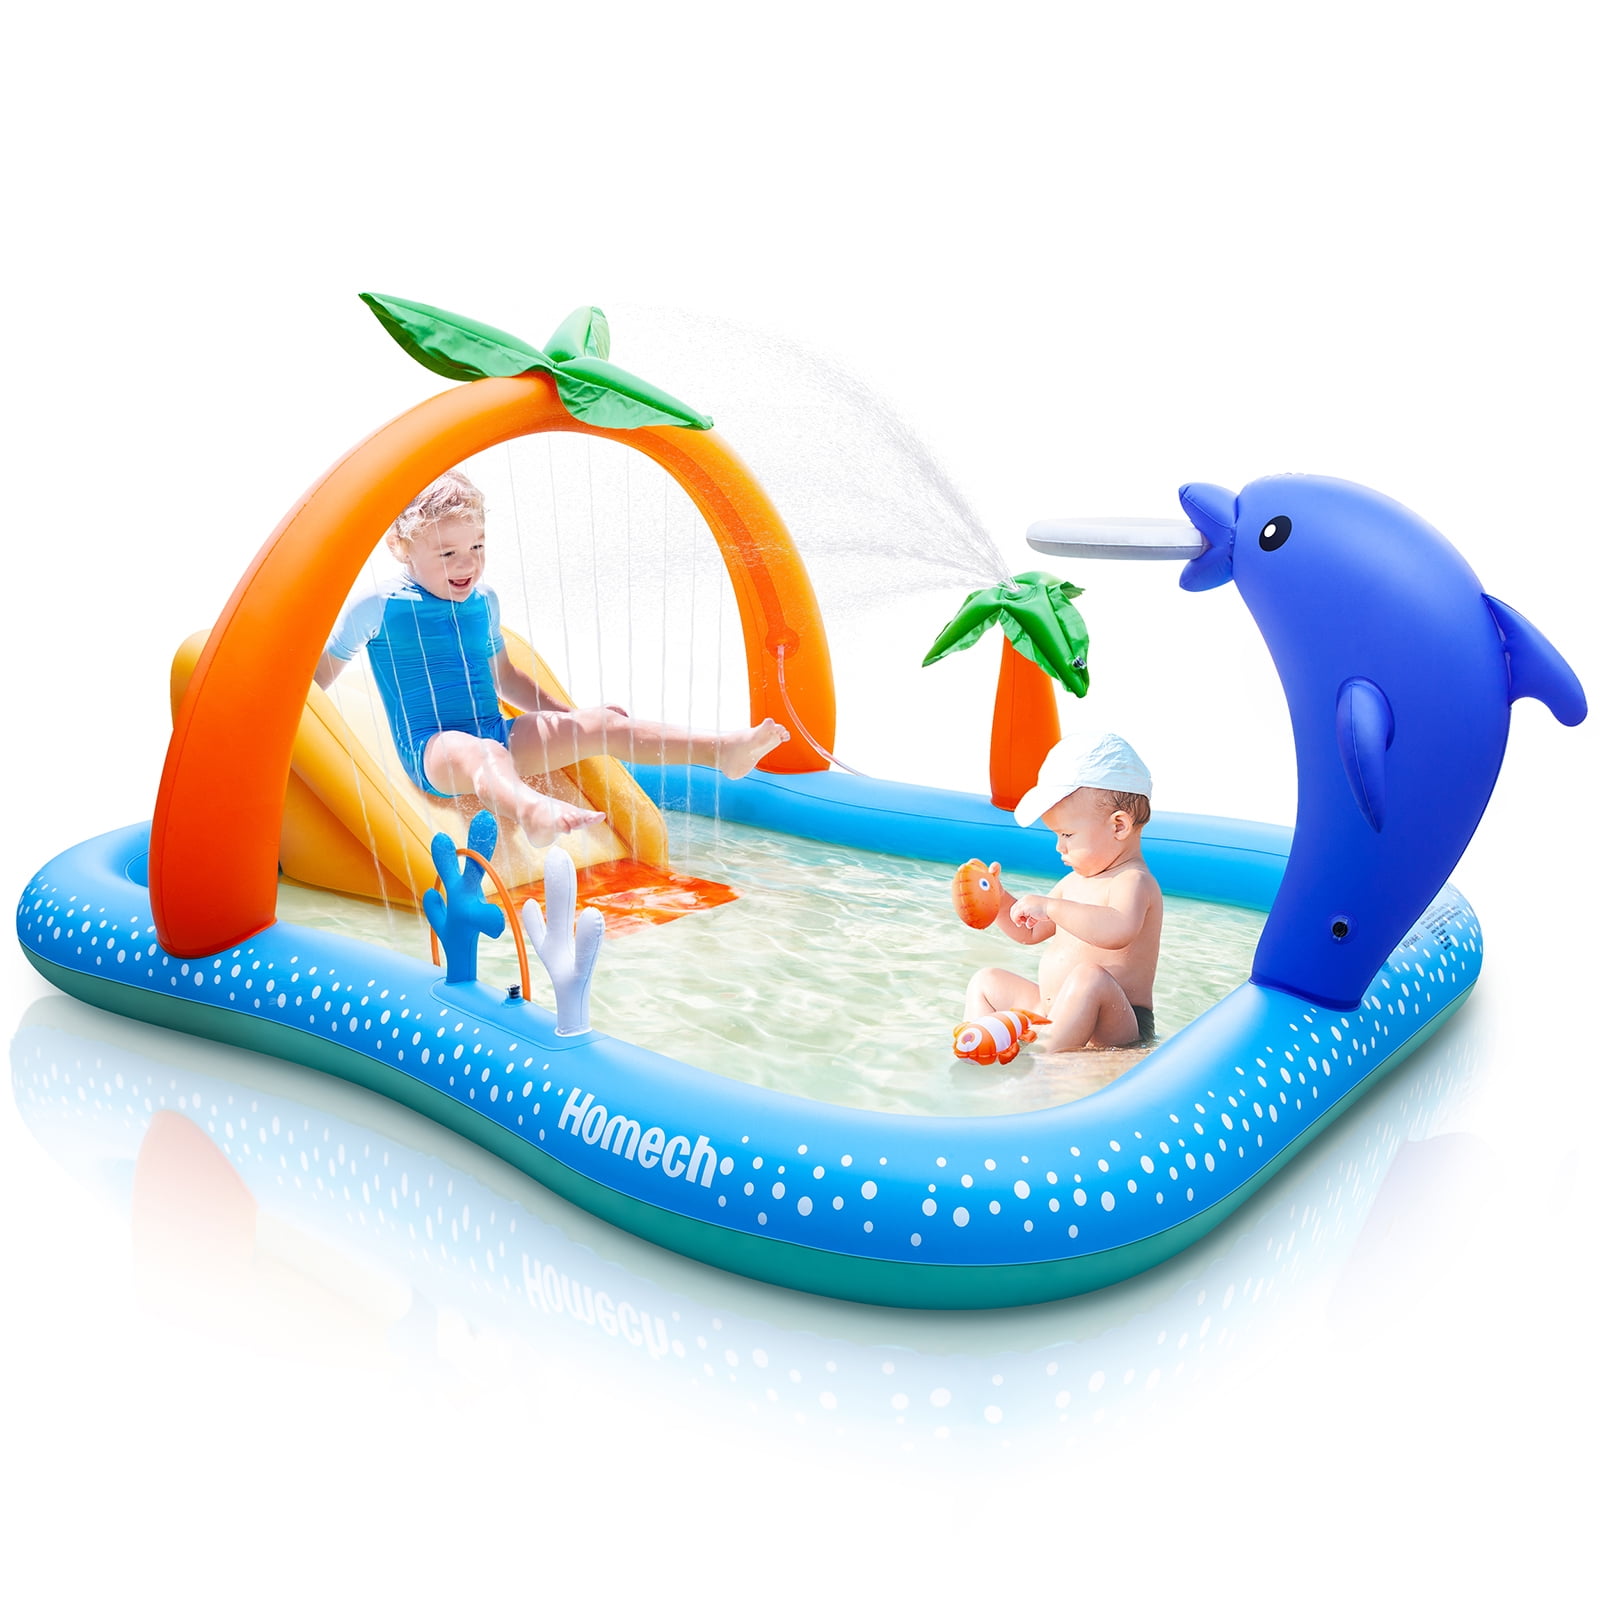 NEW KIDS HOLIDAY INFLATABLE BLUE PRINCE SWIM RING FOR BEACH OR POOL 